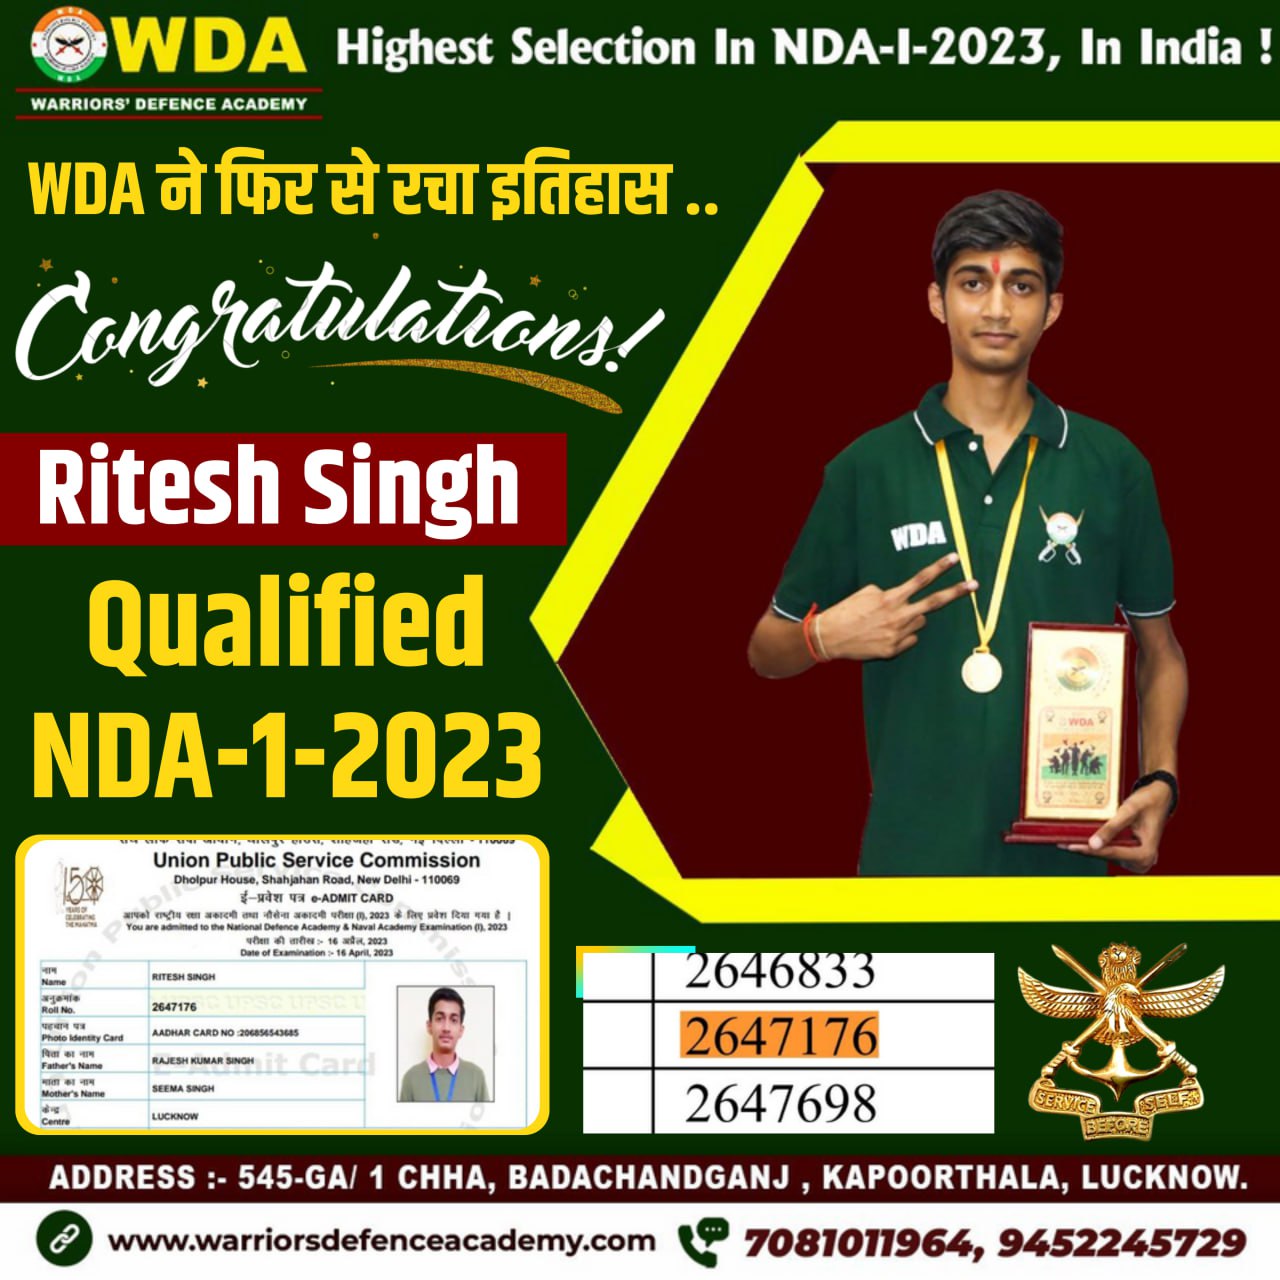 NDA Coaching Institute Lucknow | Voucher system ahead of digital currency | Best NDA Coaching in Lucknow